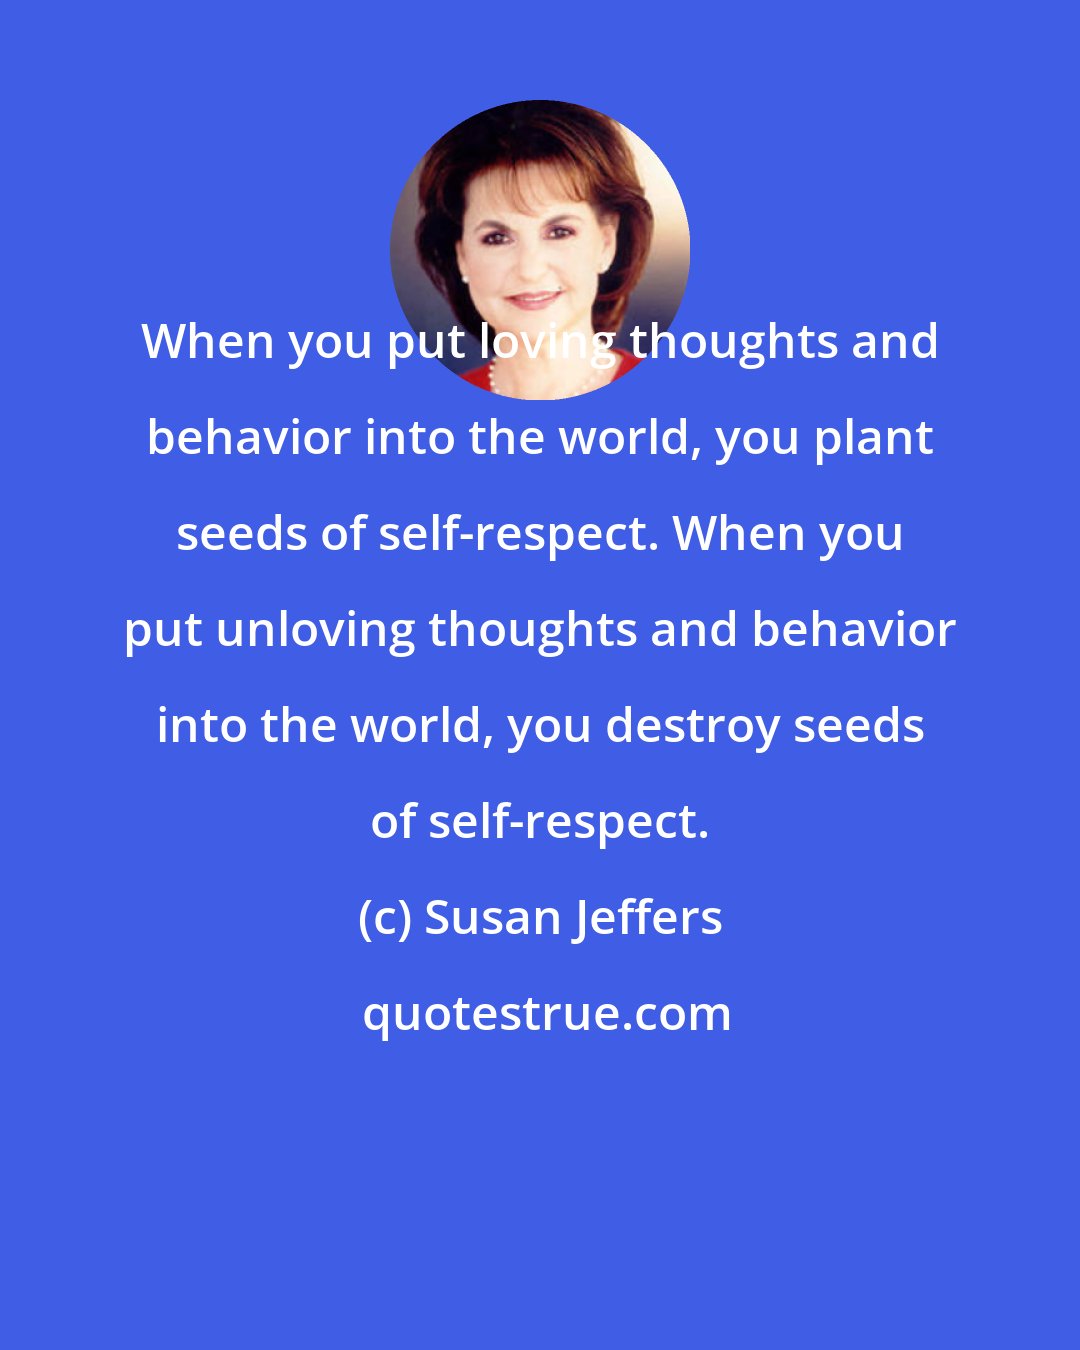 Susan Jeffers: When you put loving thoughts and behavior into the world, you plant seeds of self-respect. When you put unloving thoughts and behavior into the world, you destroy seeds of self-respect.